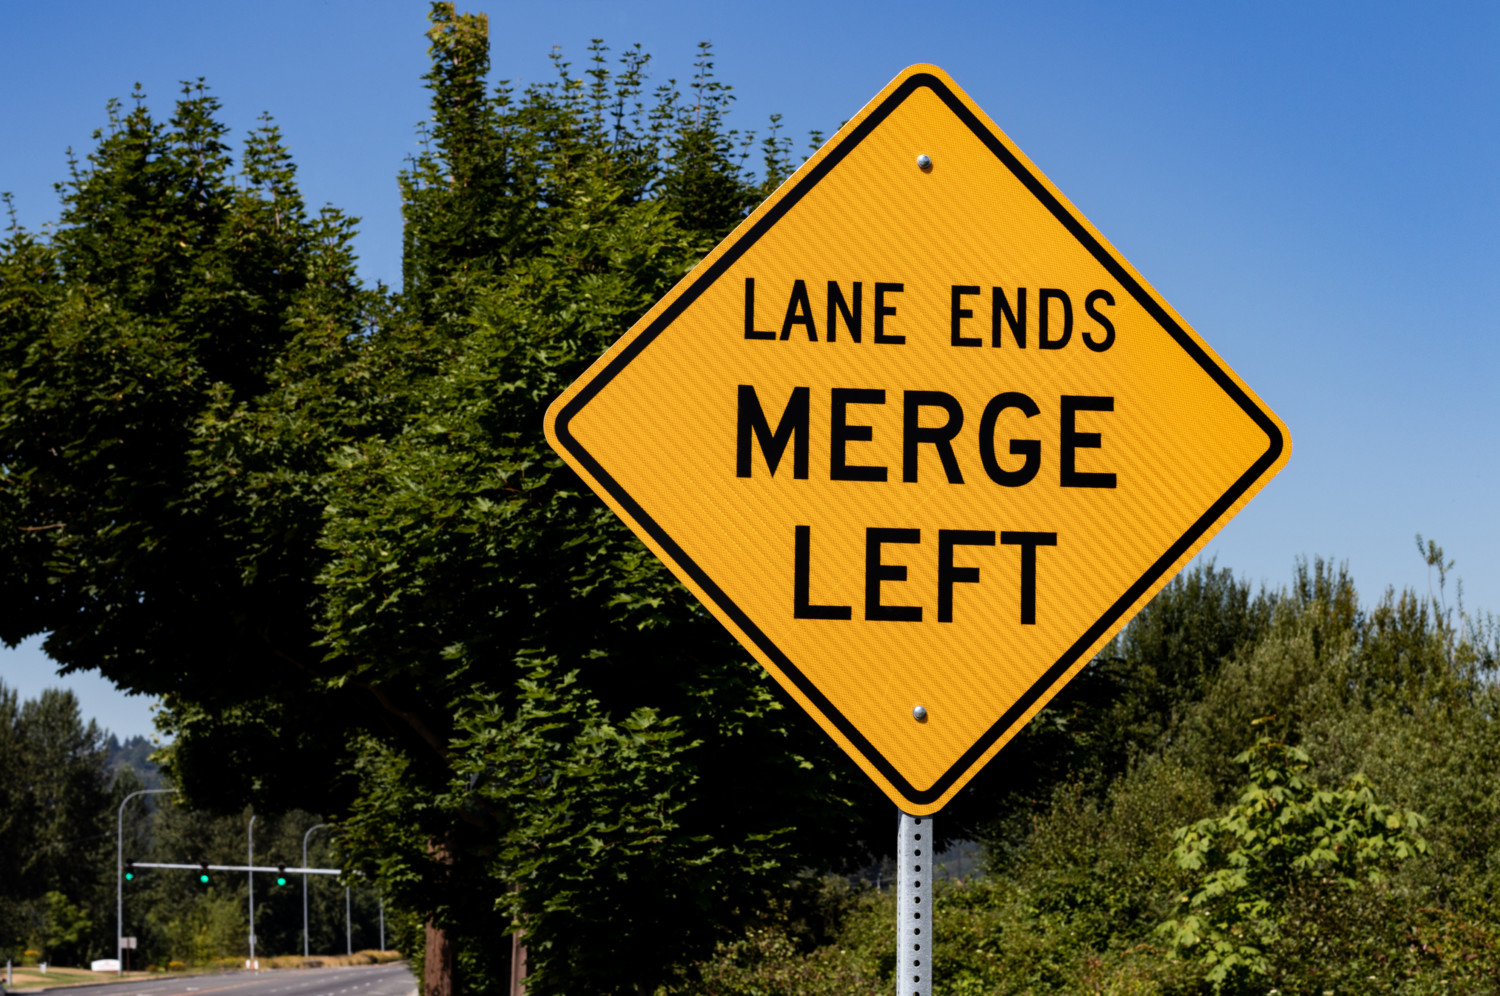 Lane ends merge left sign with trees